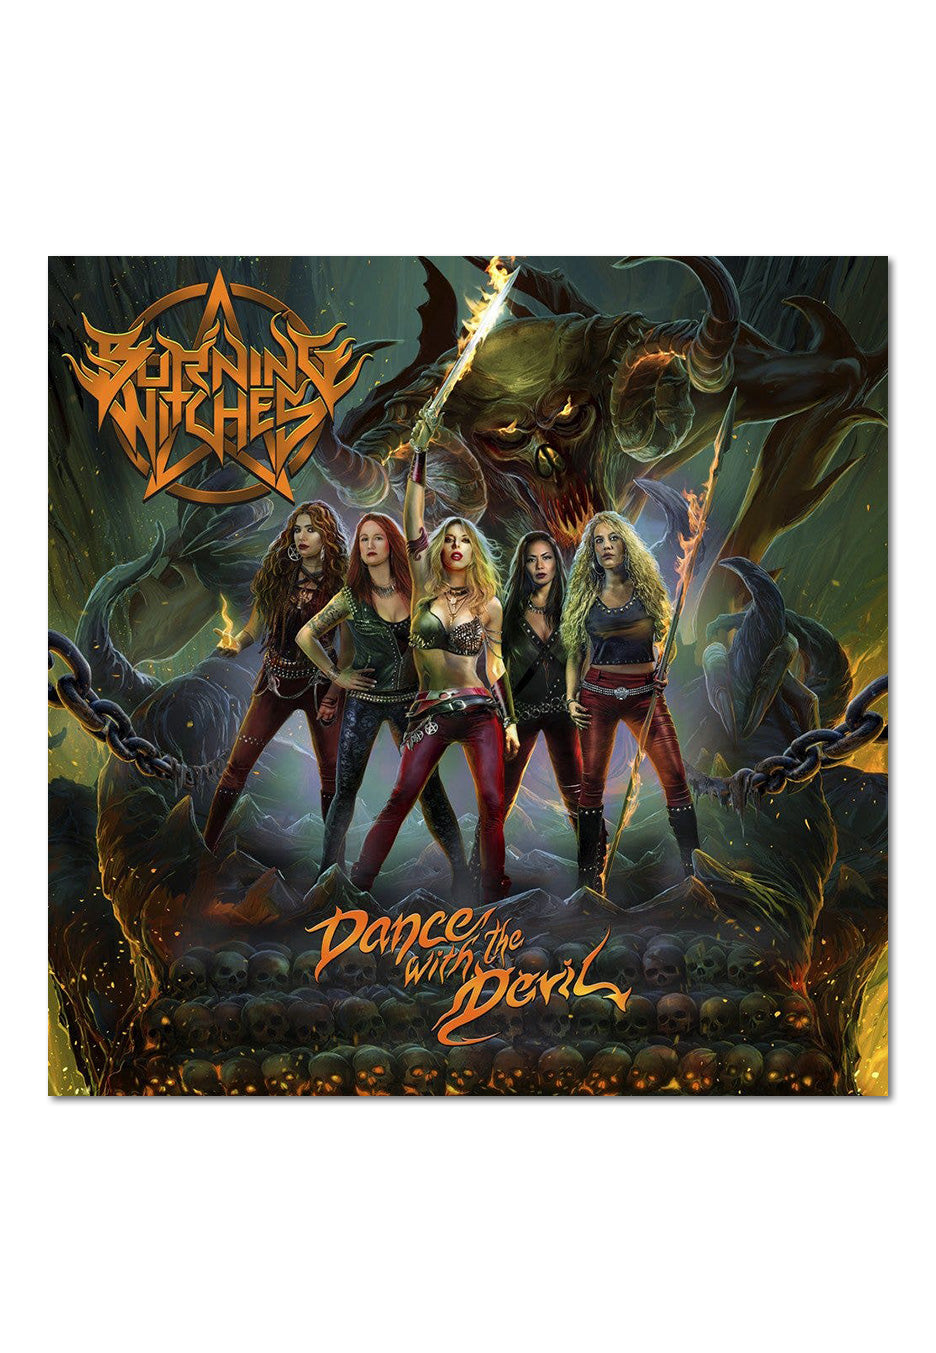 Burning Witches - Dance With The Devil - CD